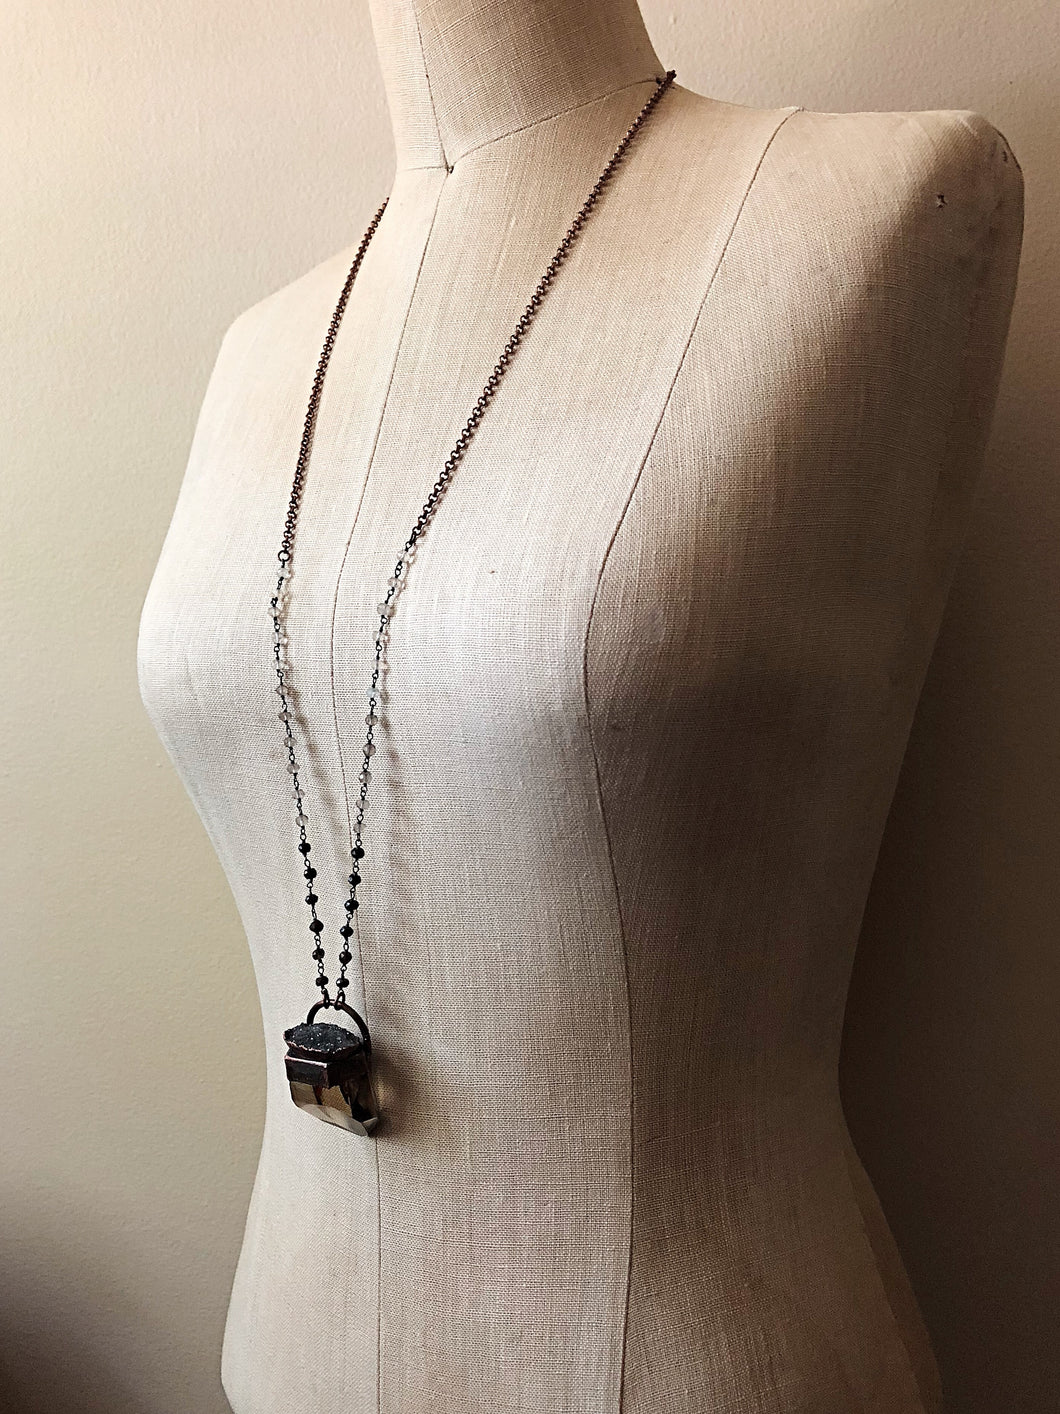 Smoky Quartz Point with Black Druzy Necklace - Ready to Ship (Flower Moon Collection)